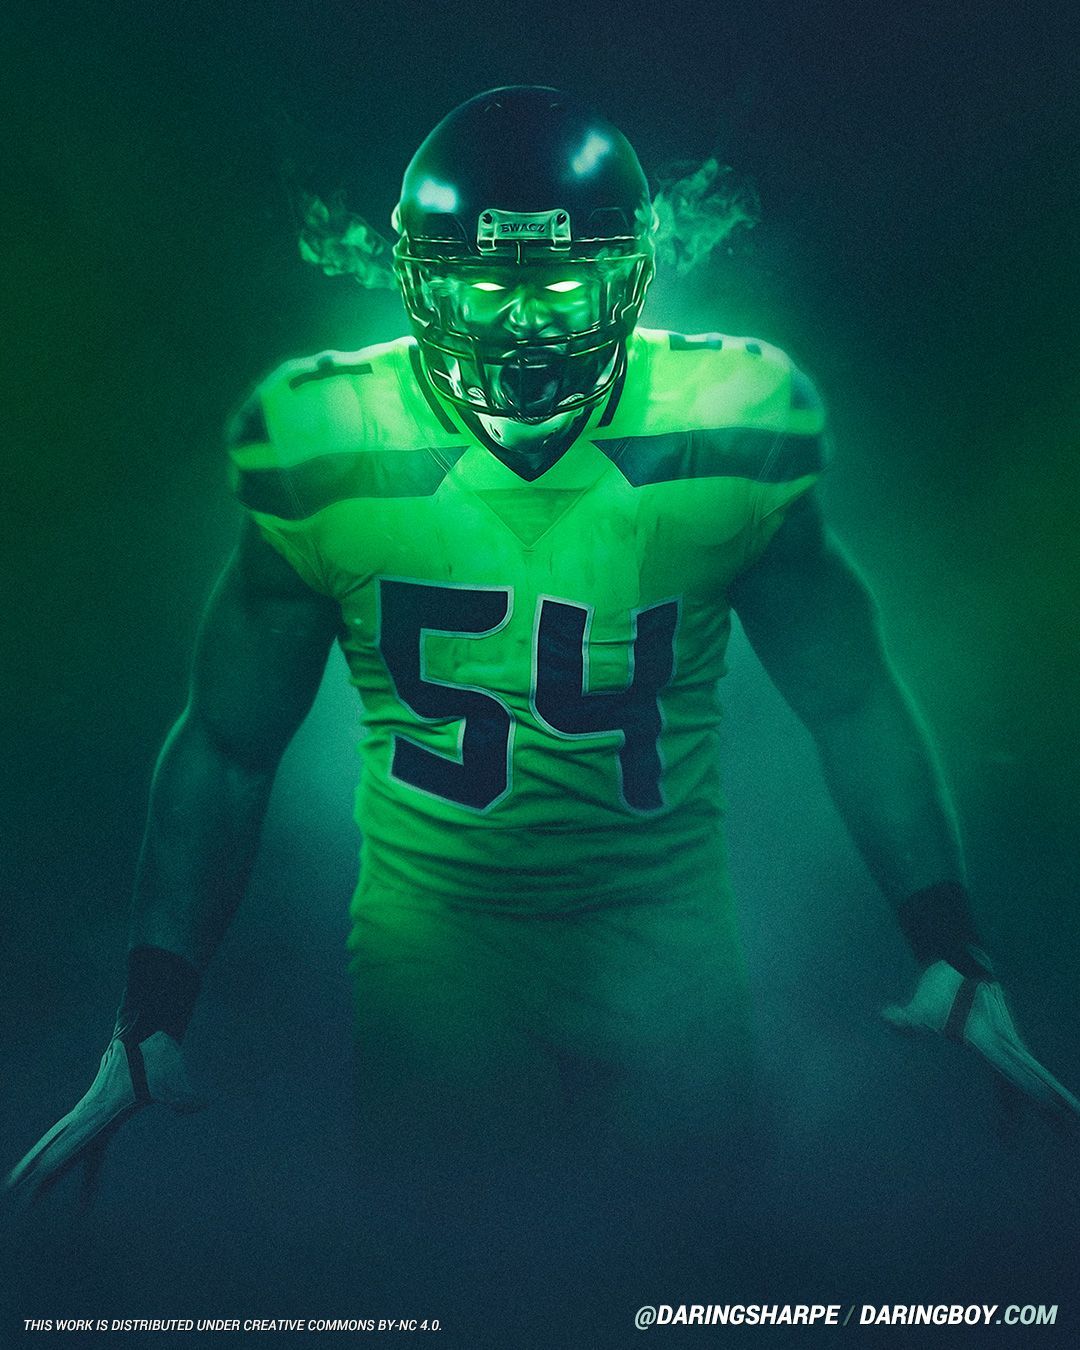 Bobby Wagner Wallpapers